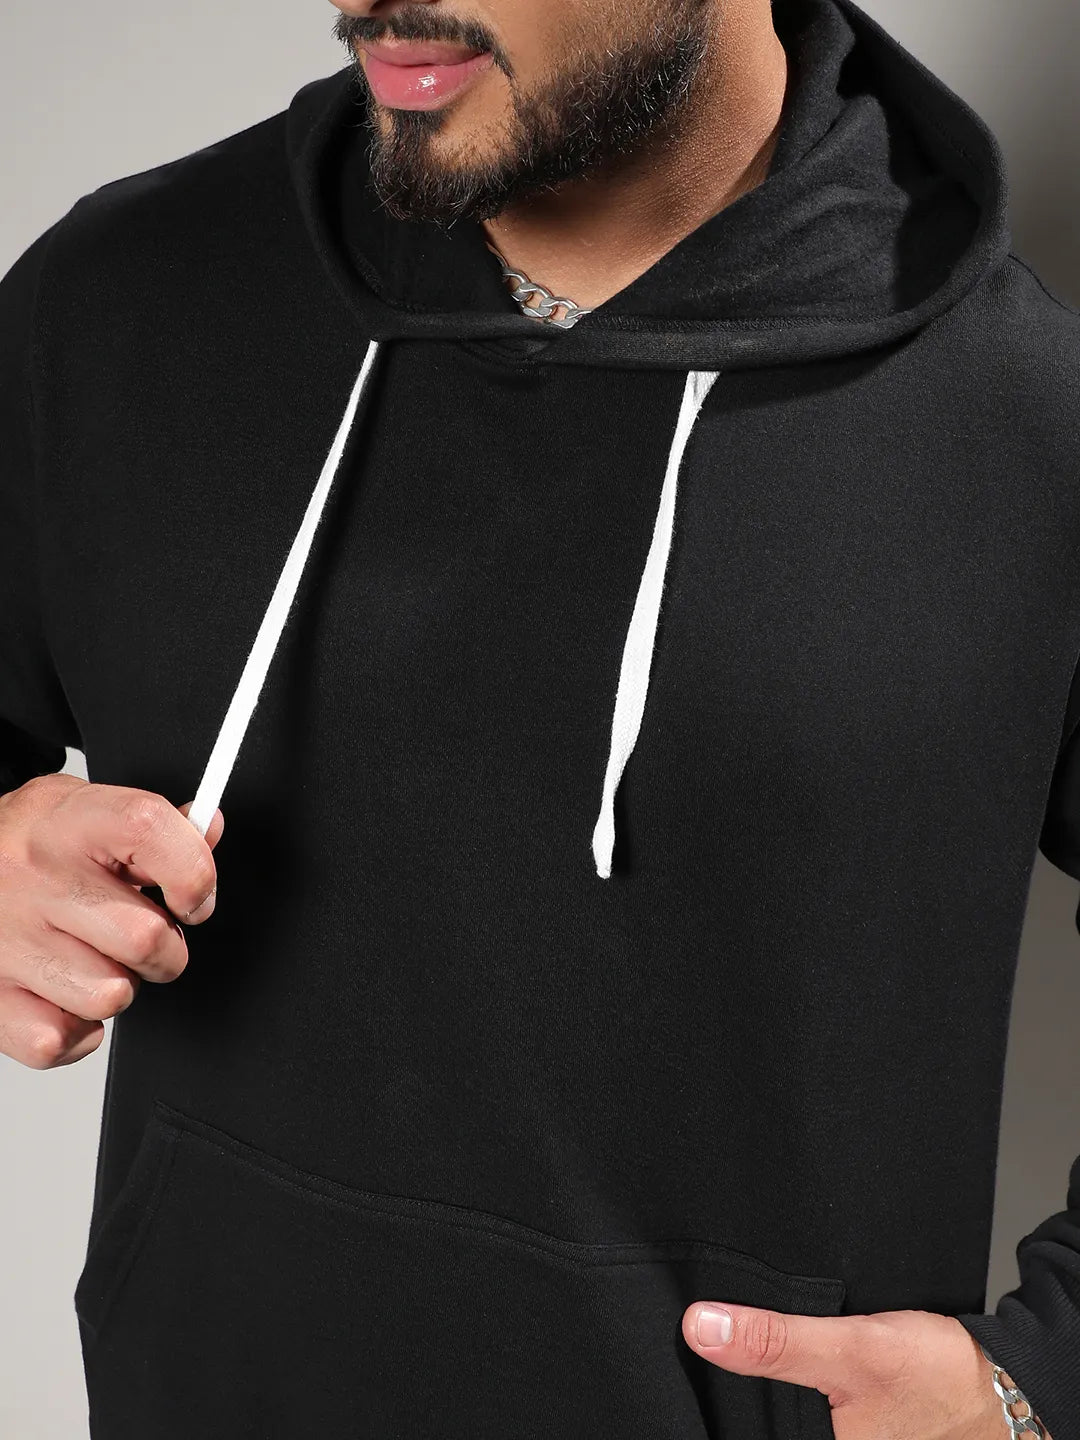 Black Pullover Hoodie With Contrast Drawstring